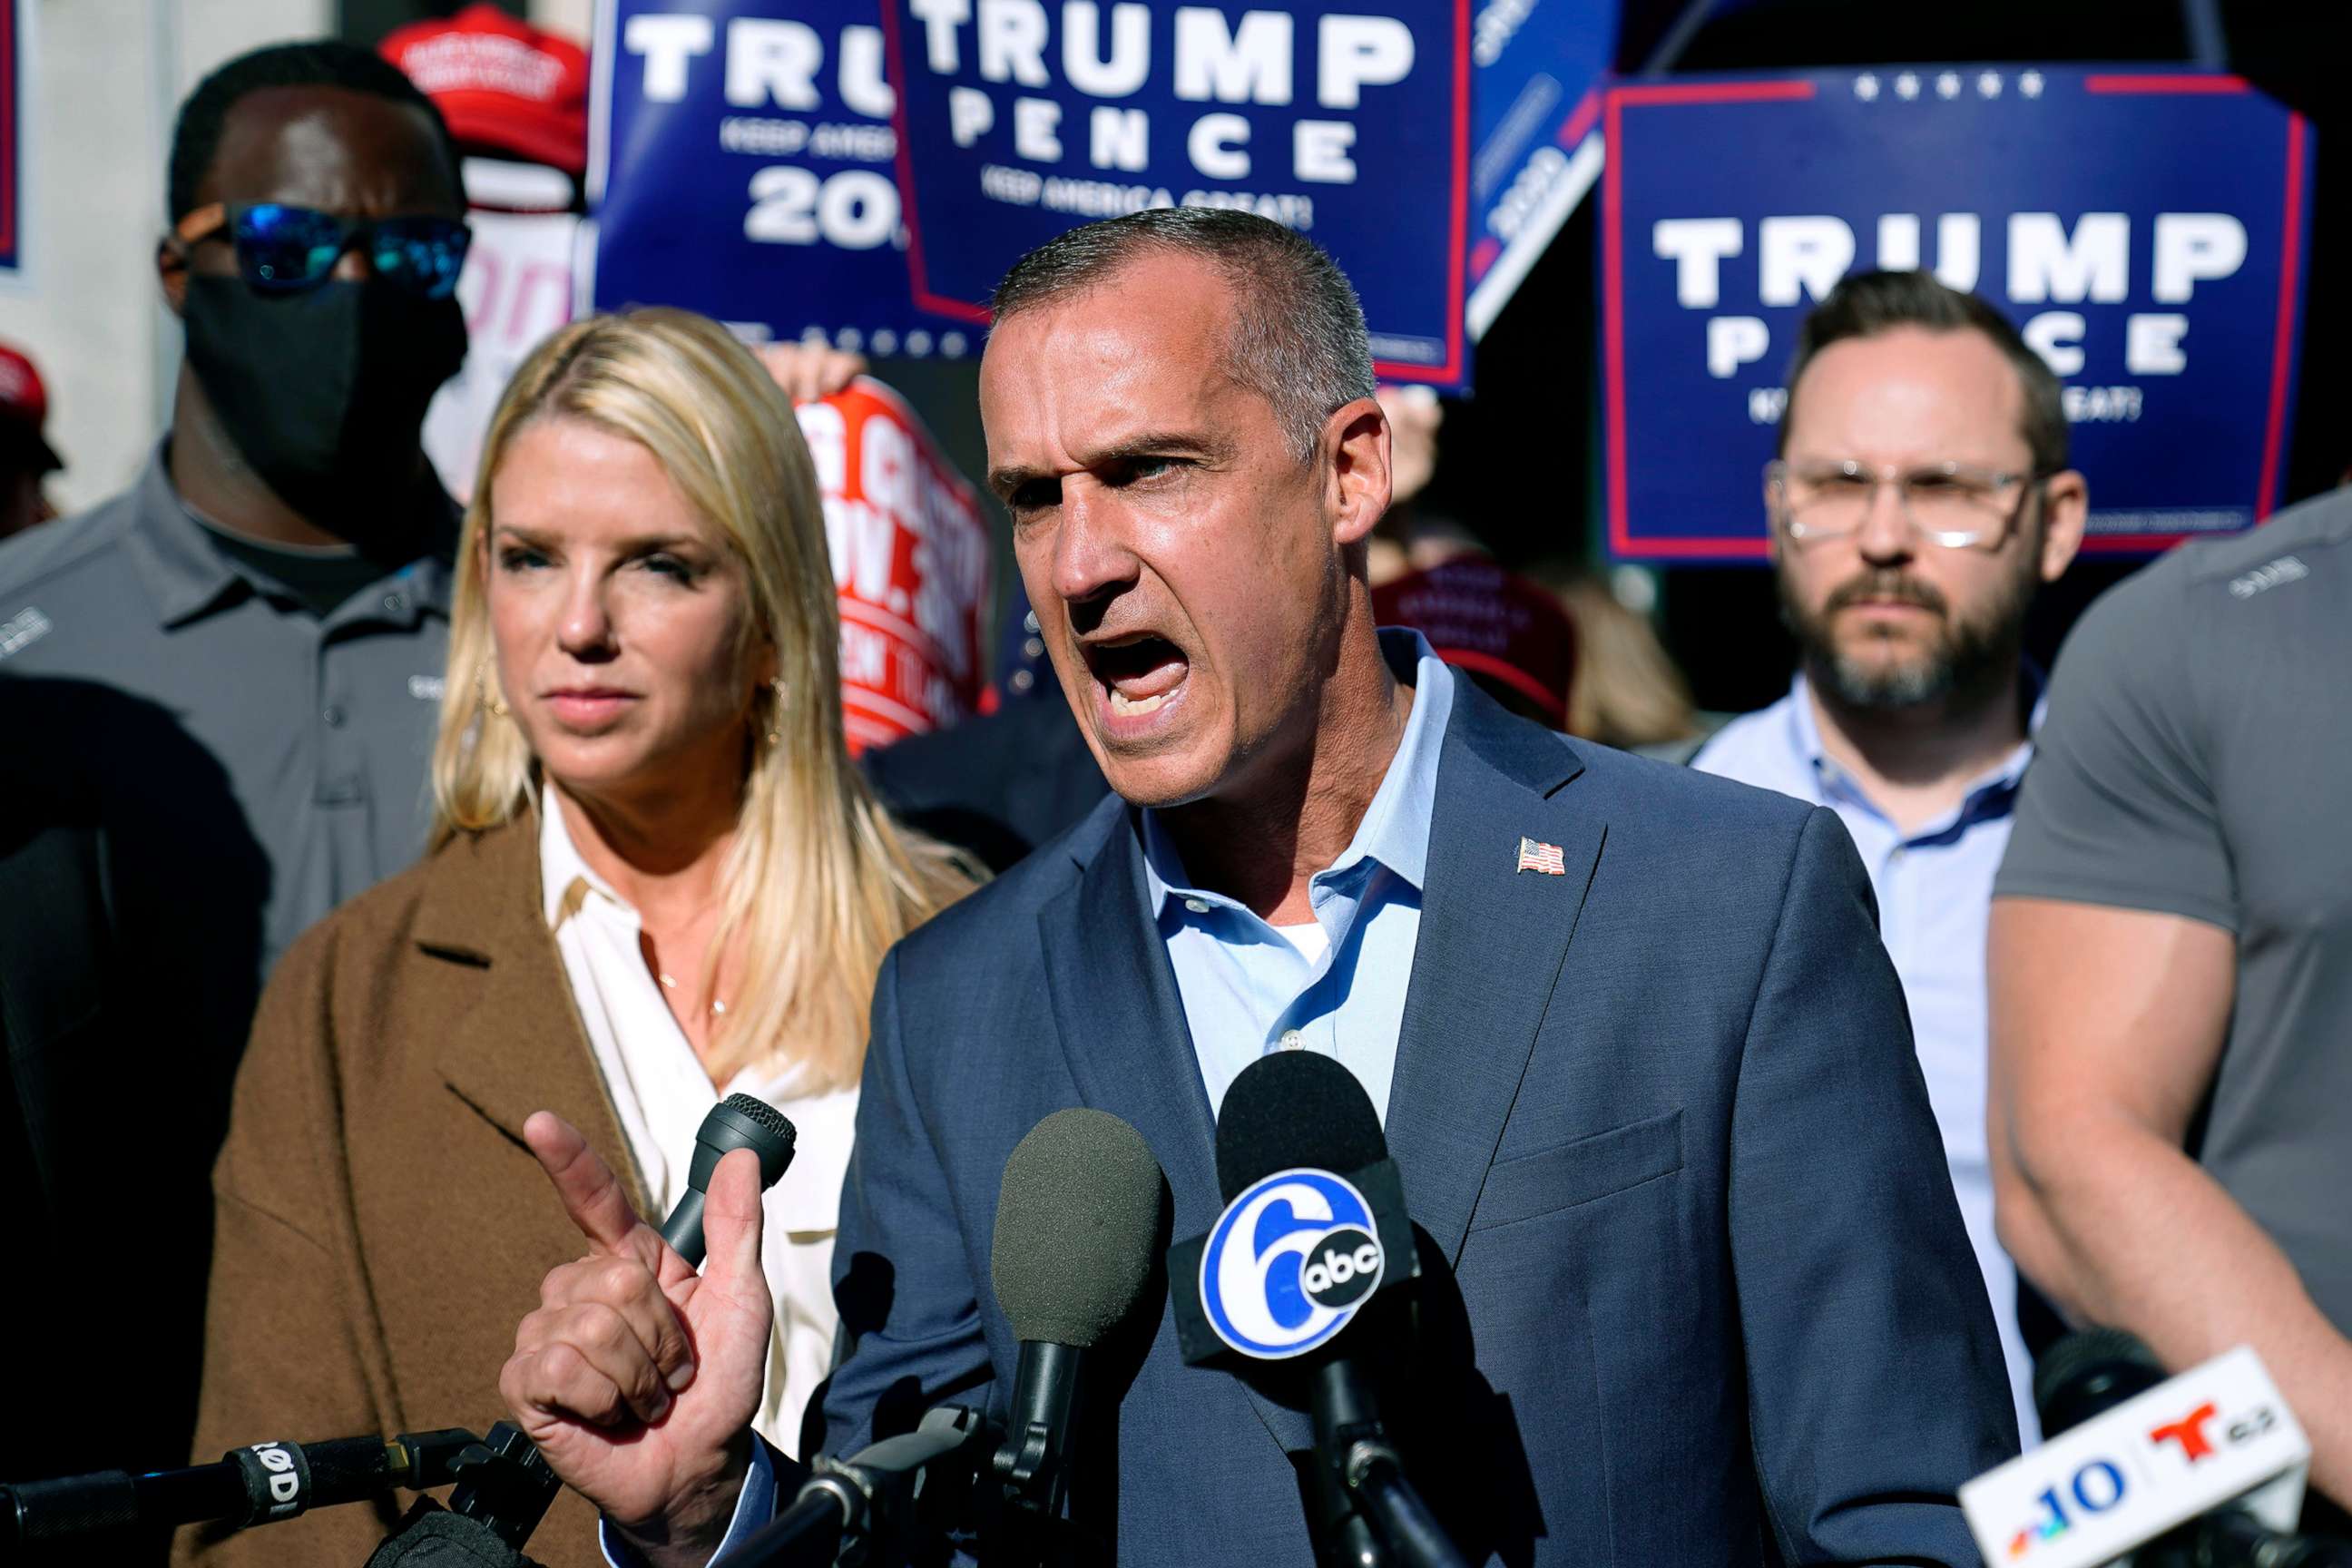 PHOTO: President Donald Trump's campaign advisor Corey Lewandowski, center, speaks outside the Pennsylvania Convention Center where votes are being counted, Nov. 5, 2020, in Philadelphia, following Tuesday's election.